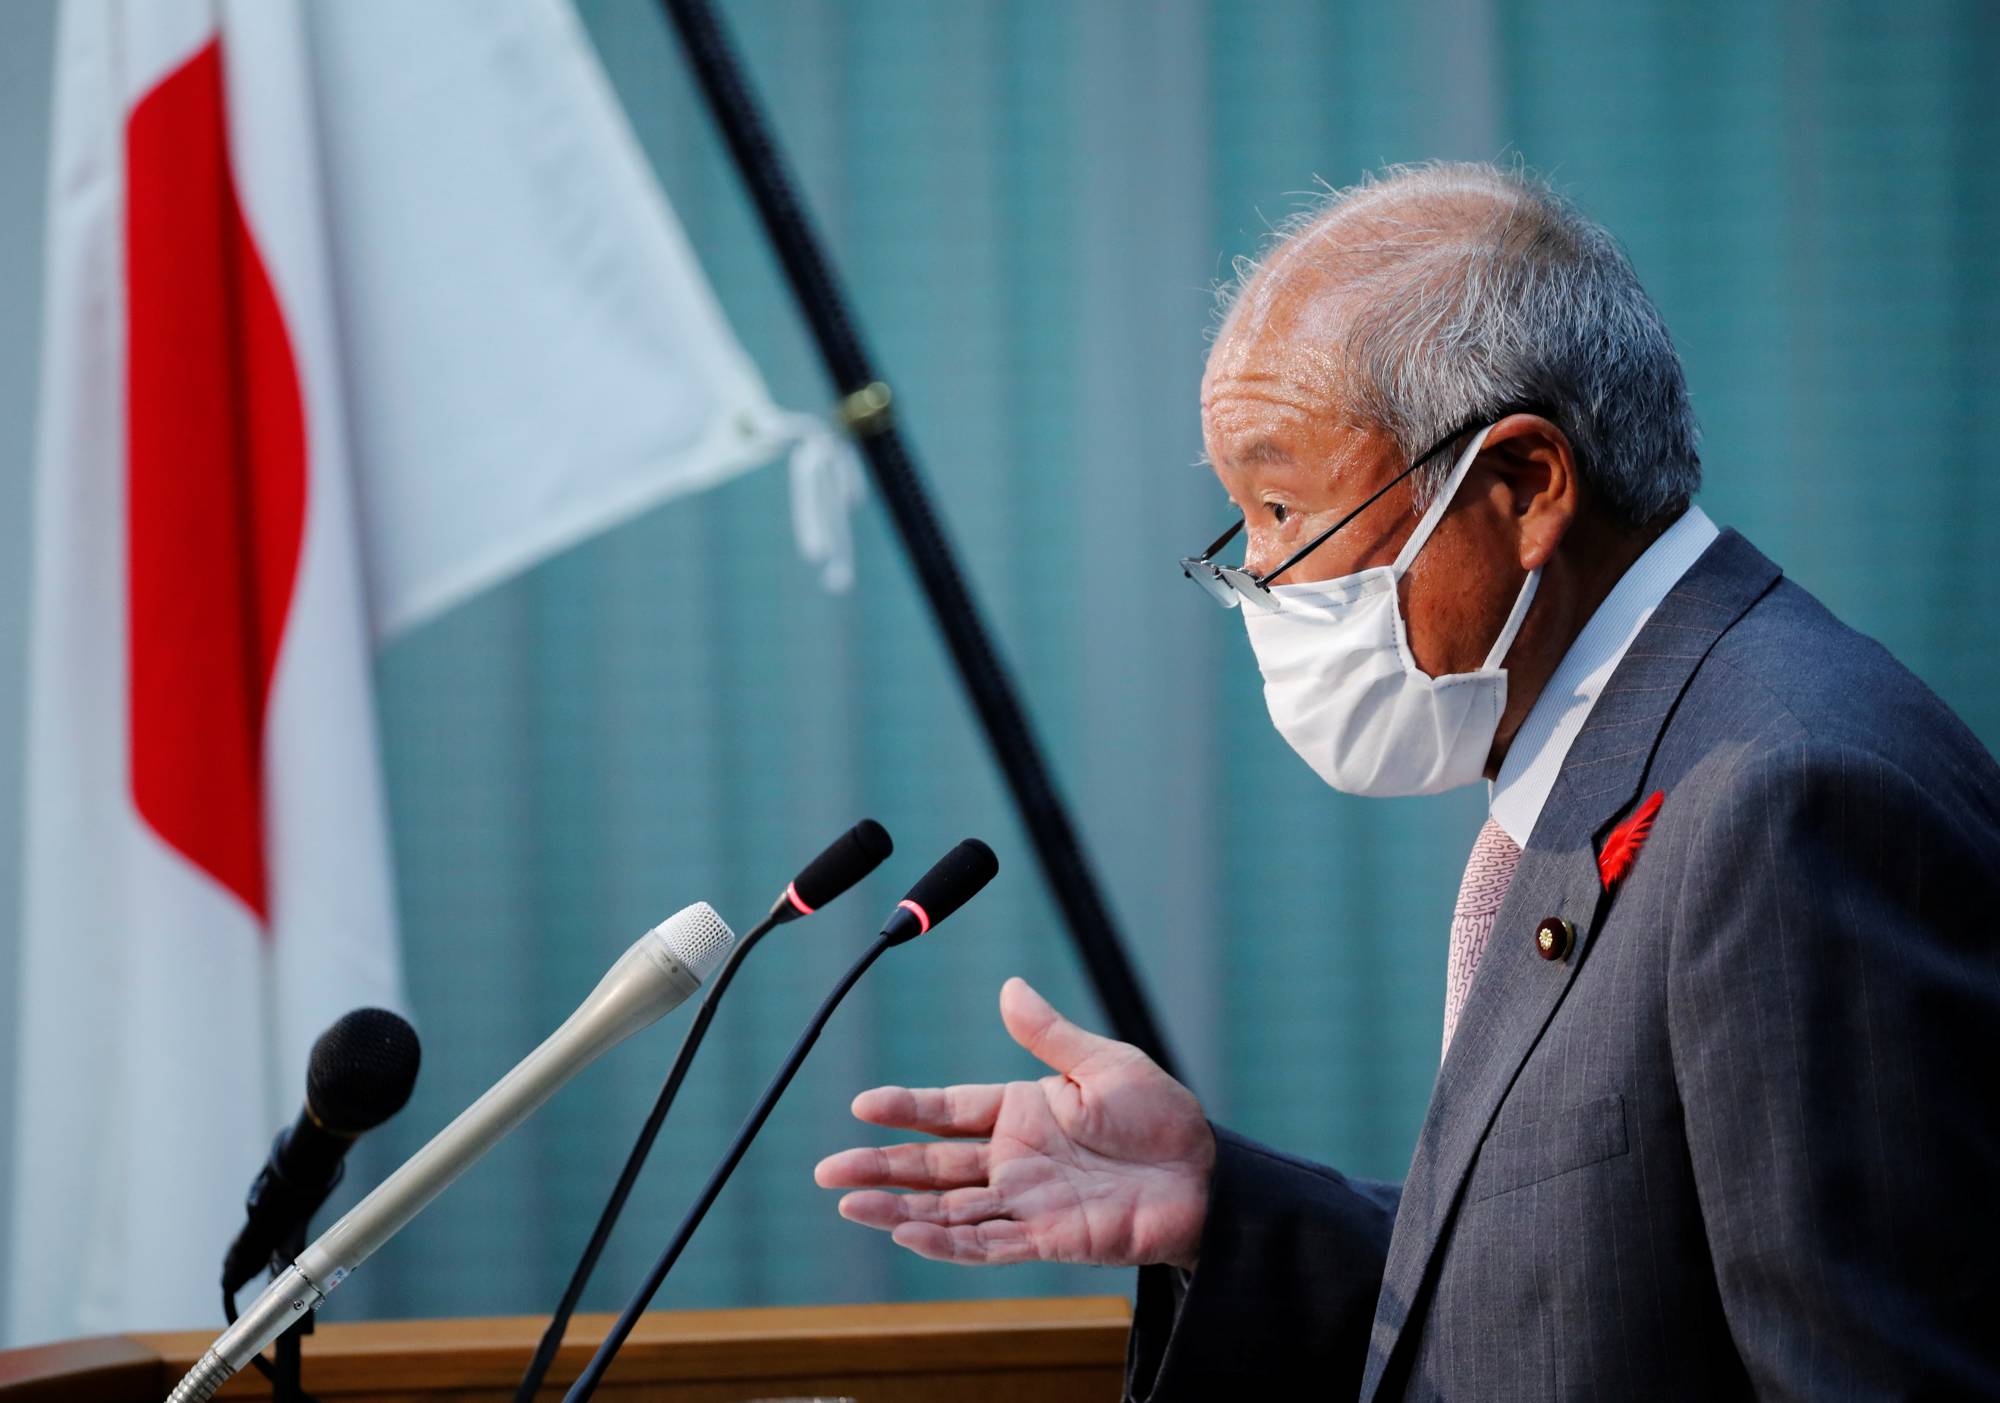 Finance Minister Shunichi Suzuki speaks at a news conference in Tokyo on Tuesday. | REUTERS